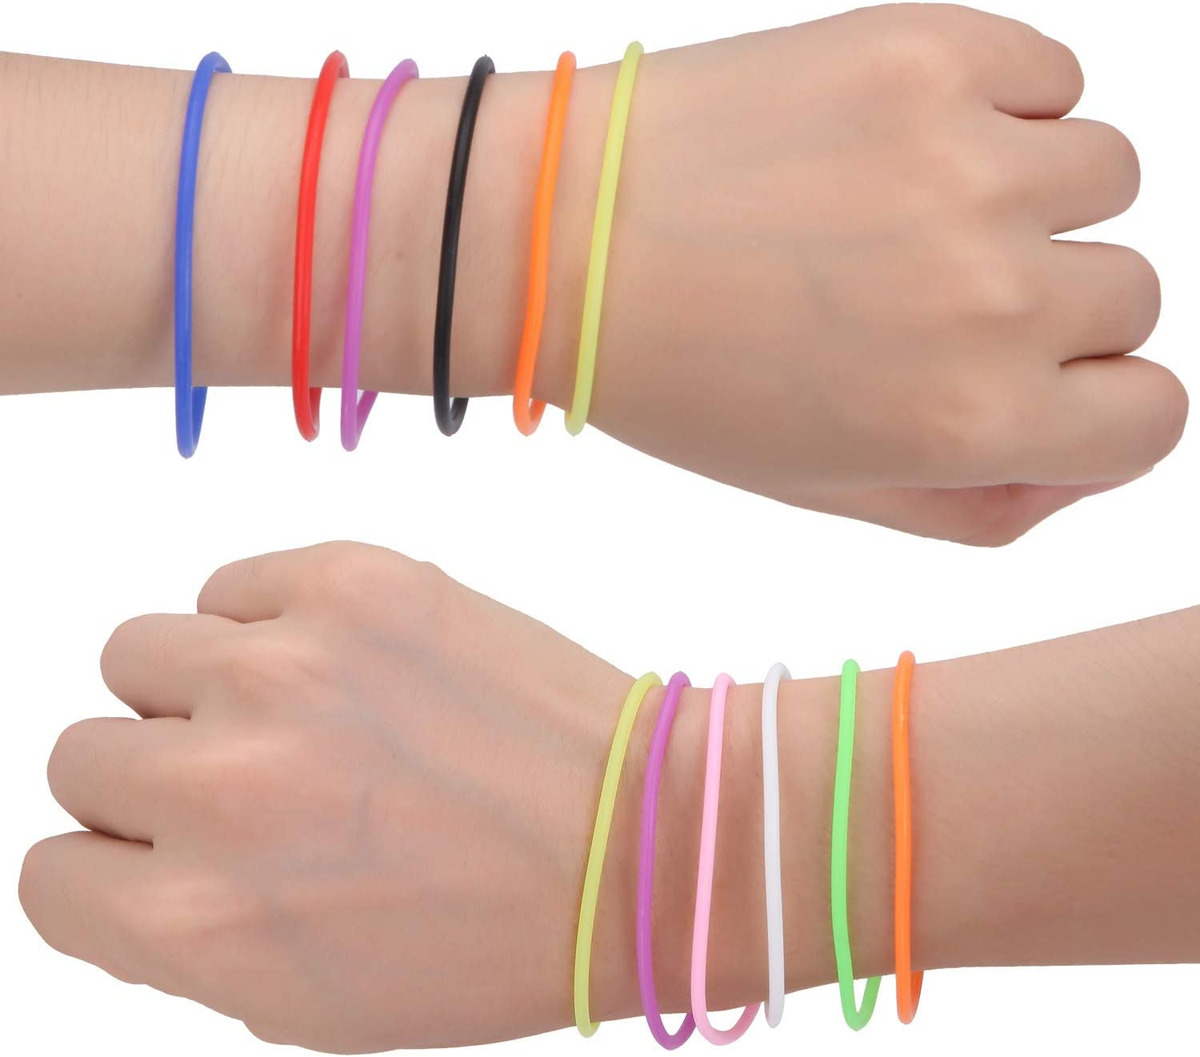 Are Jelly Sex Bracelets Really A Thing? Or Are Parents Freaking Out For No  Reason?